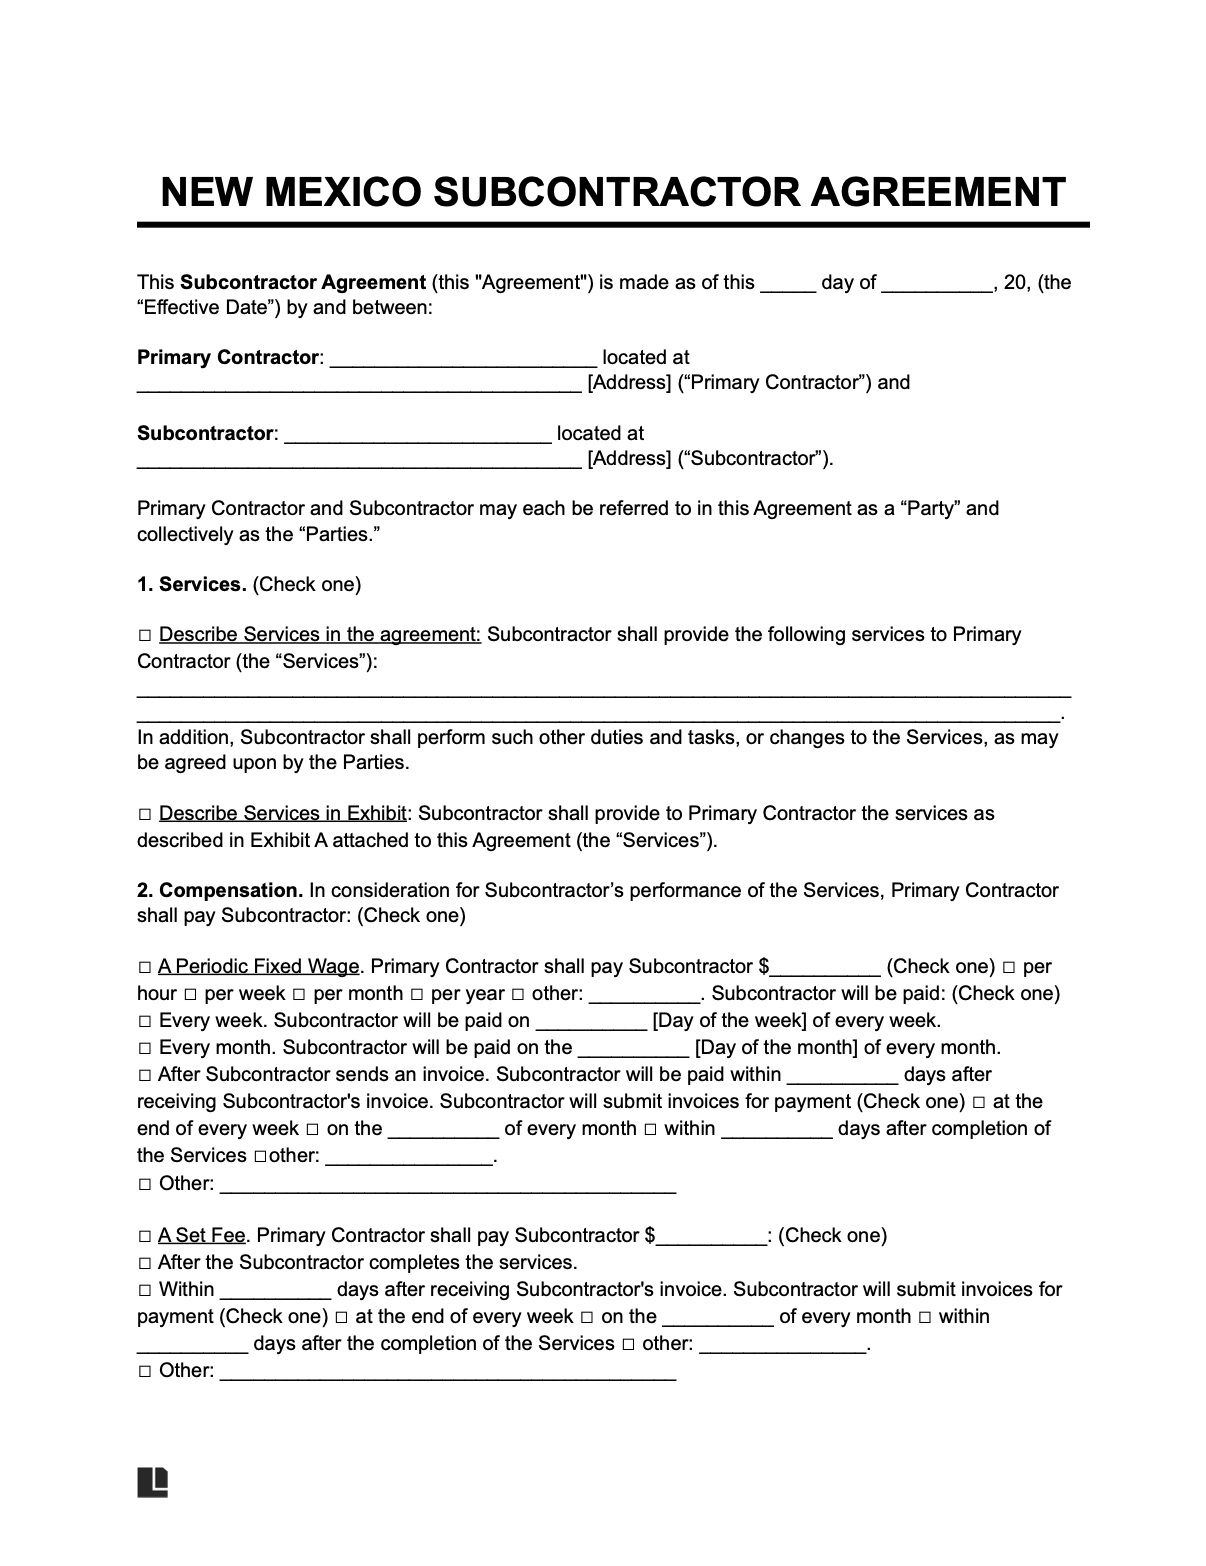 new mexico subcontractor agreement template